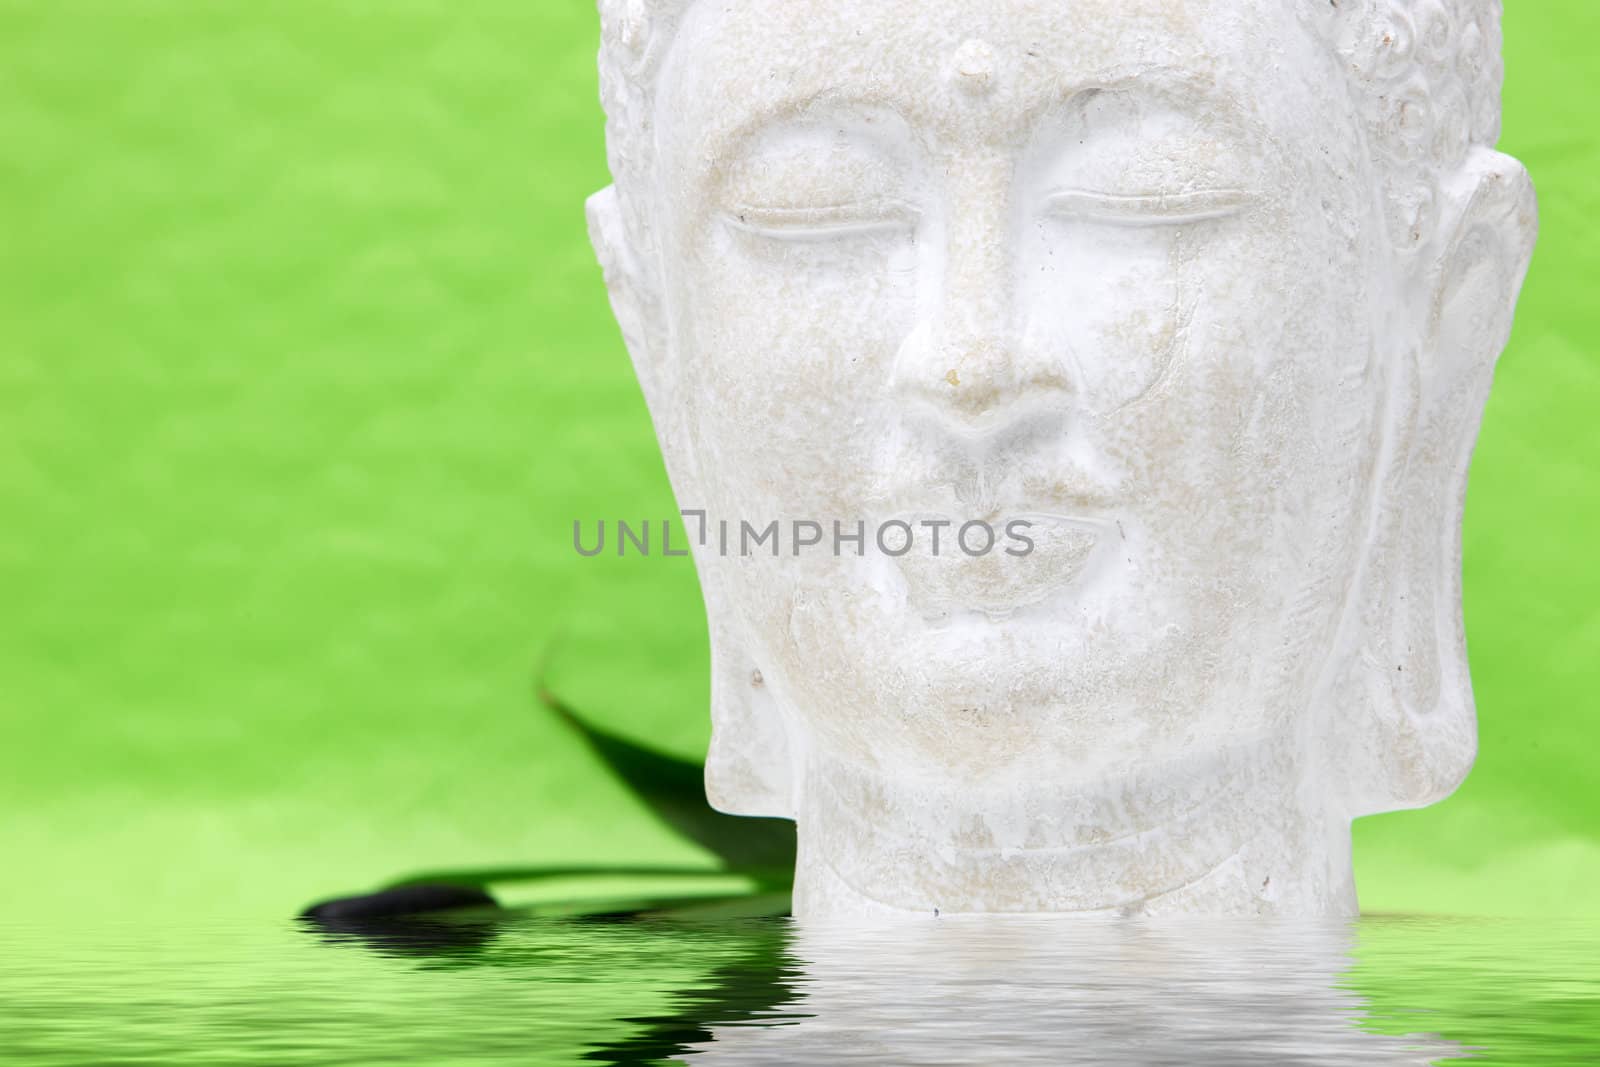 Head of meditating yoga statue with water reflection